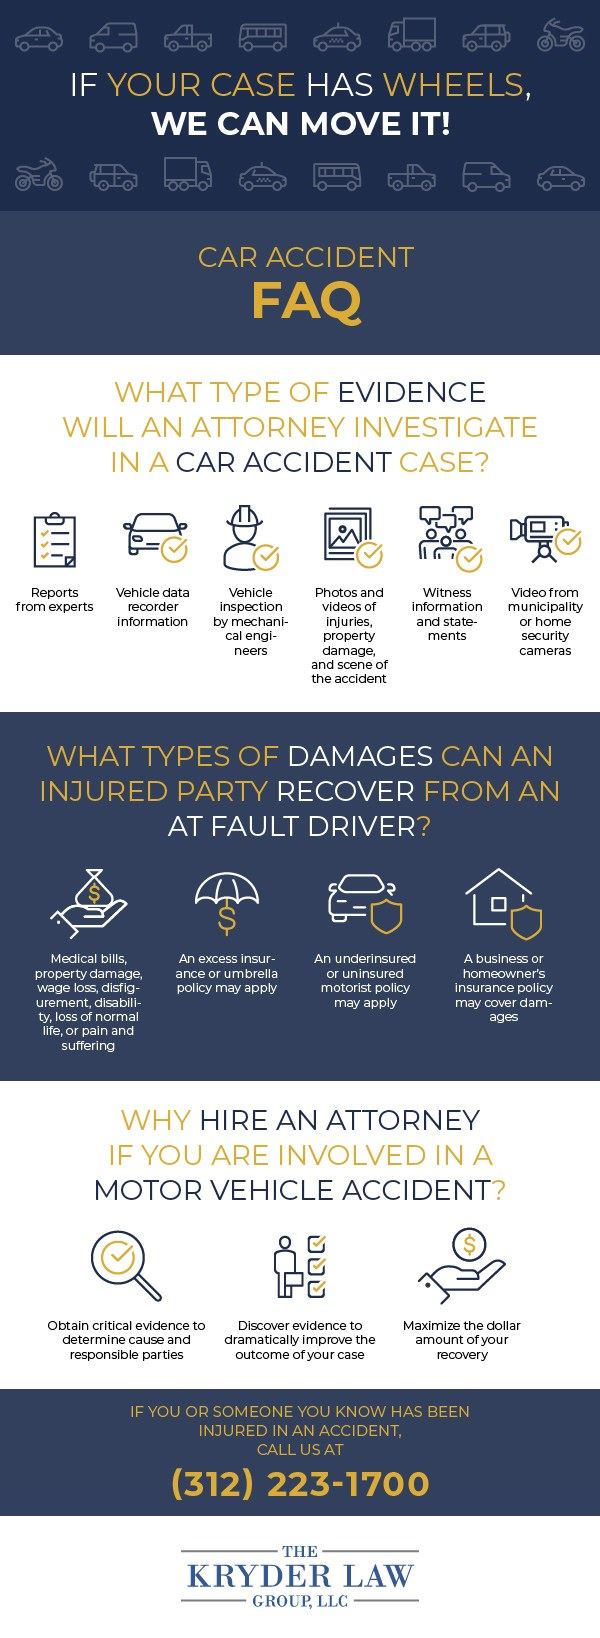 Car Accident FAQ from The Kryder Law Group